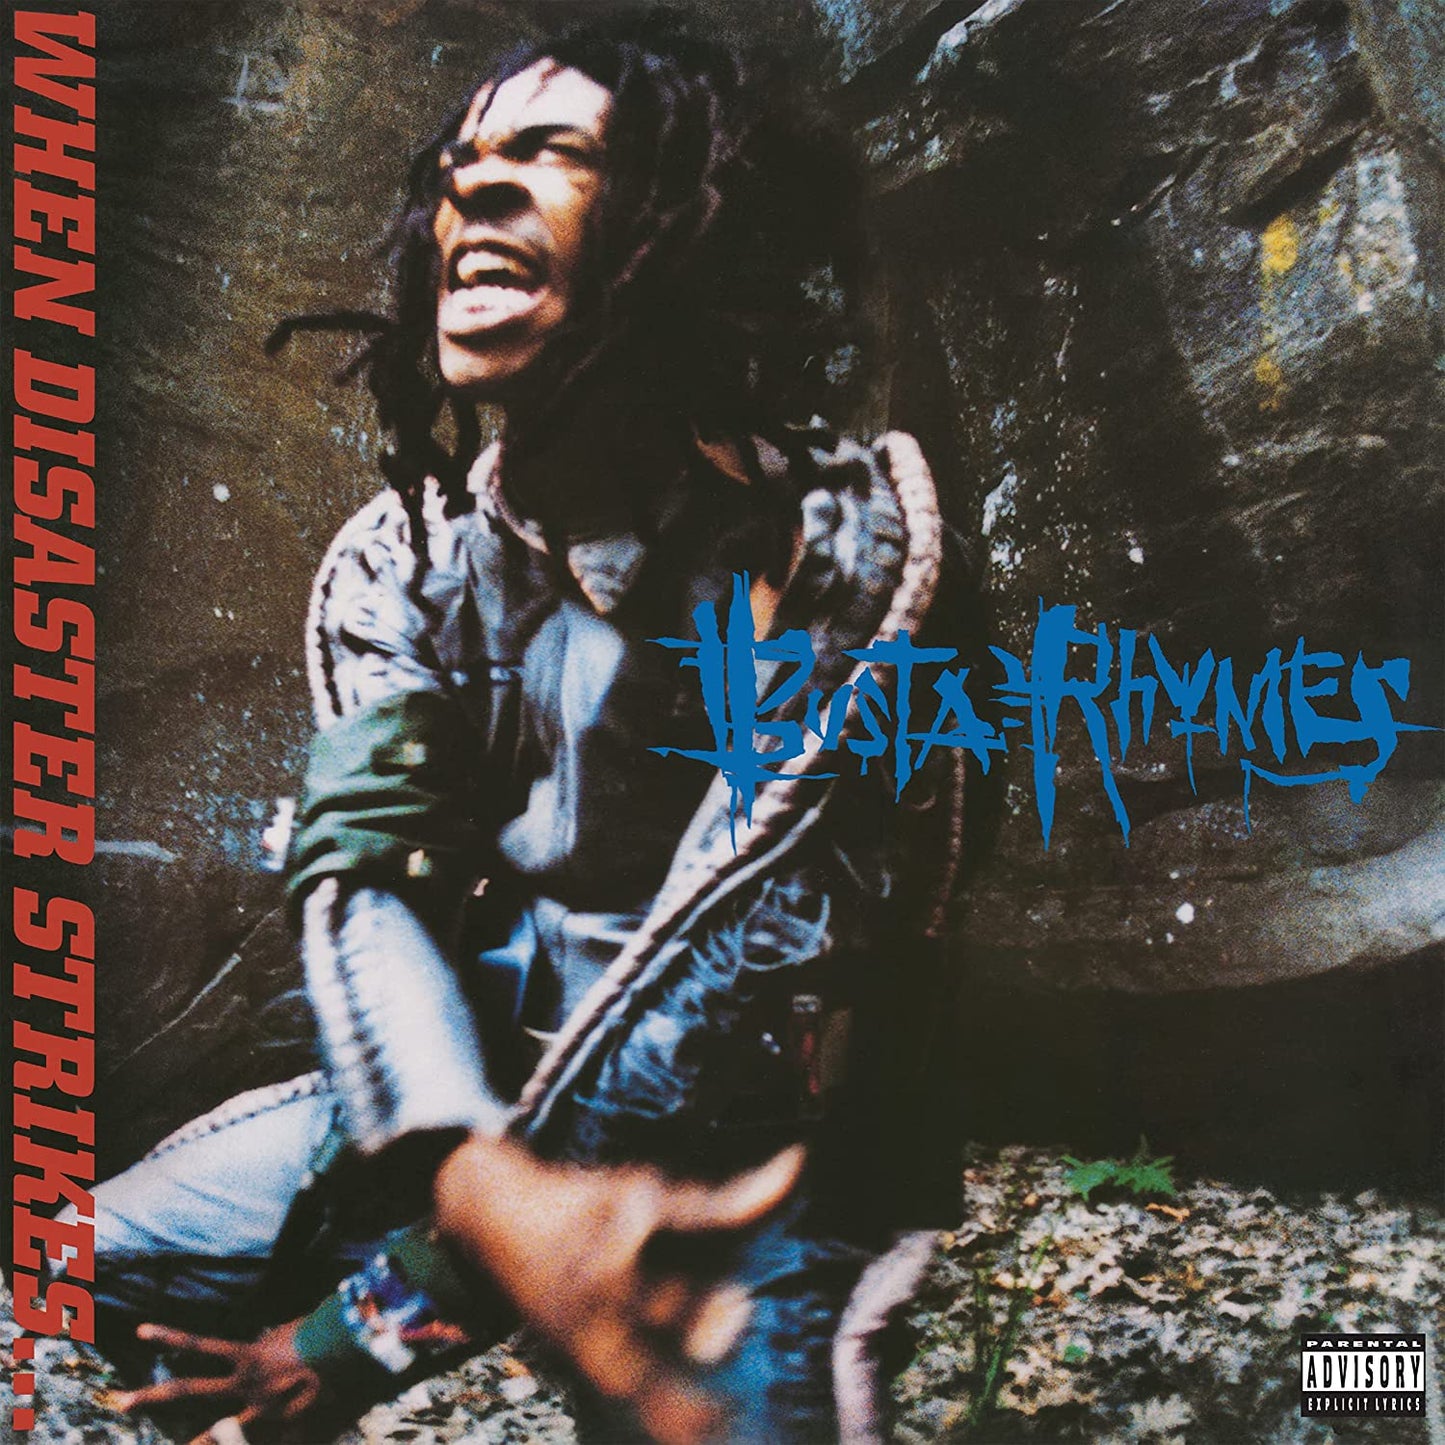 BUSTA RHYMES - WHEN DISASTER STRIKES - 25TH ANNIVERSARY EDITION - SILVER COLOR - 2-LP - VINYL LP